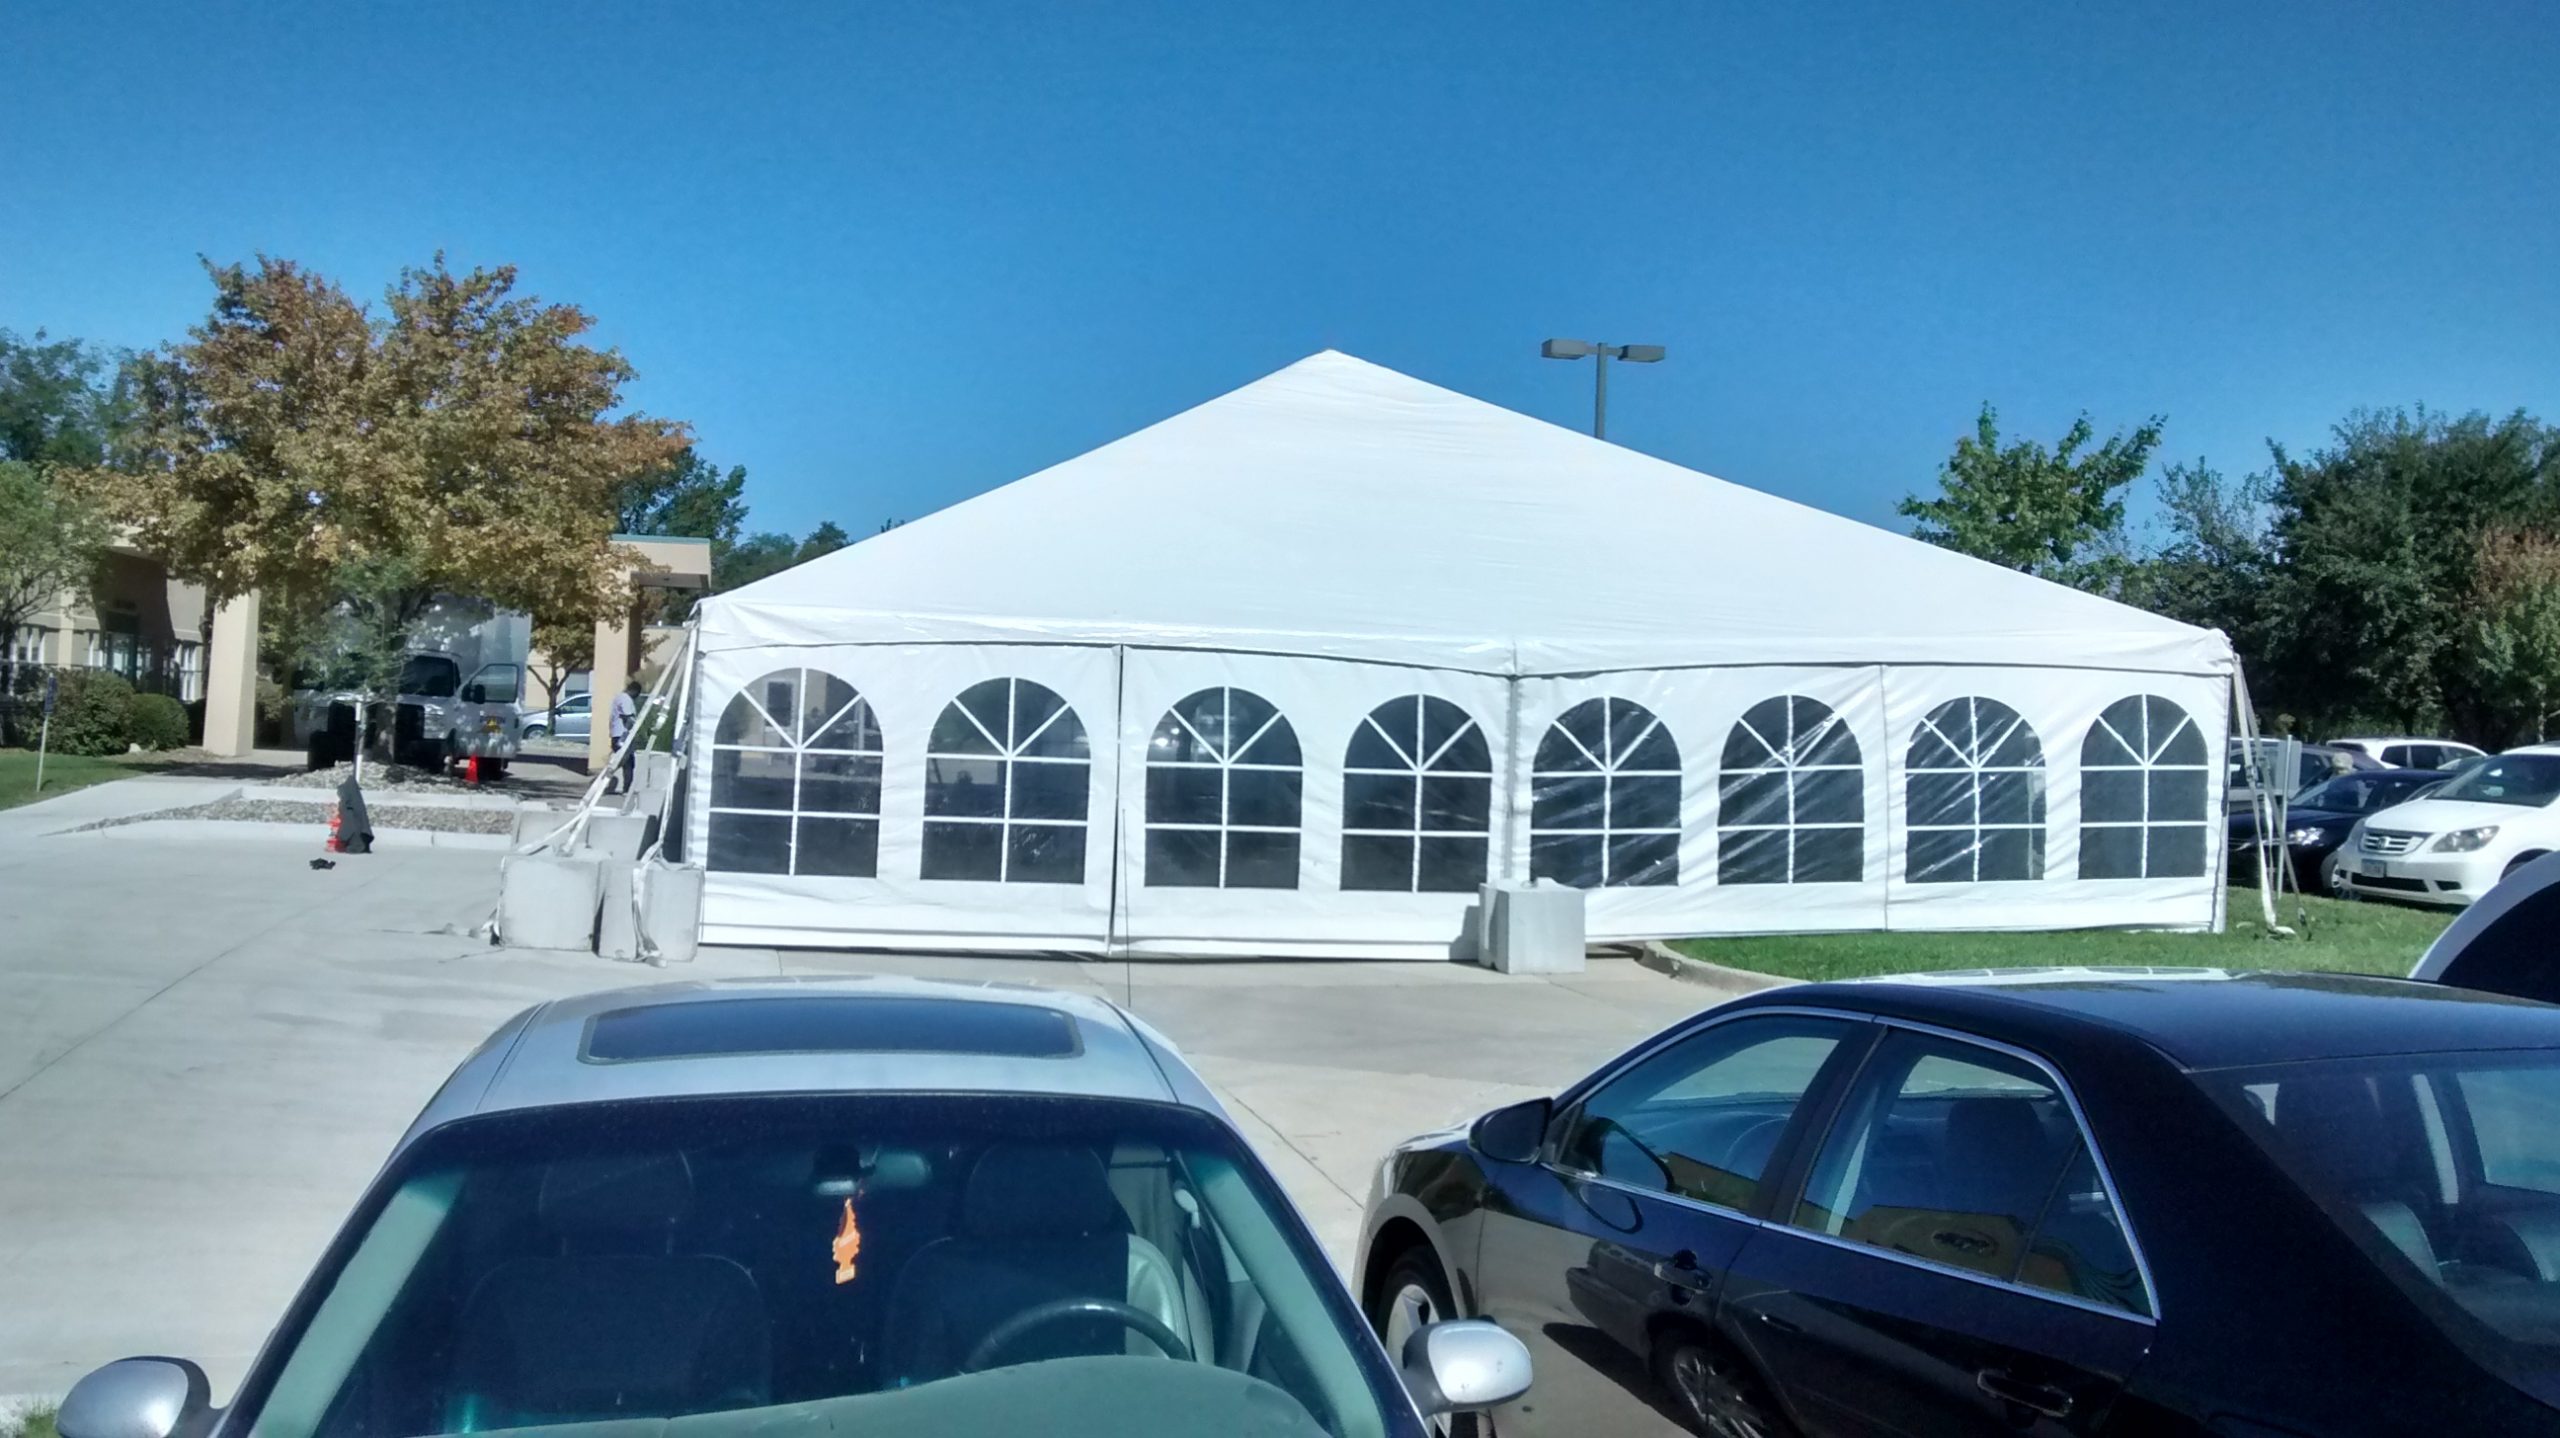 End of 40' x 100' hybrid tent setup for On with Life. They have a Celebrate Life fundraiser in Ankeny, IA